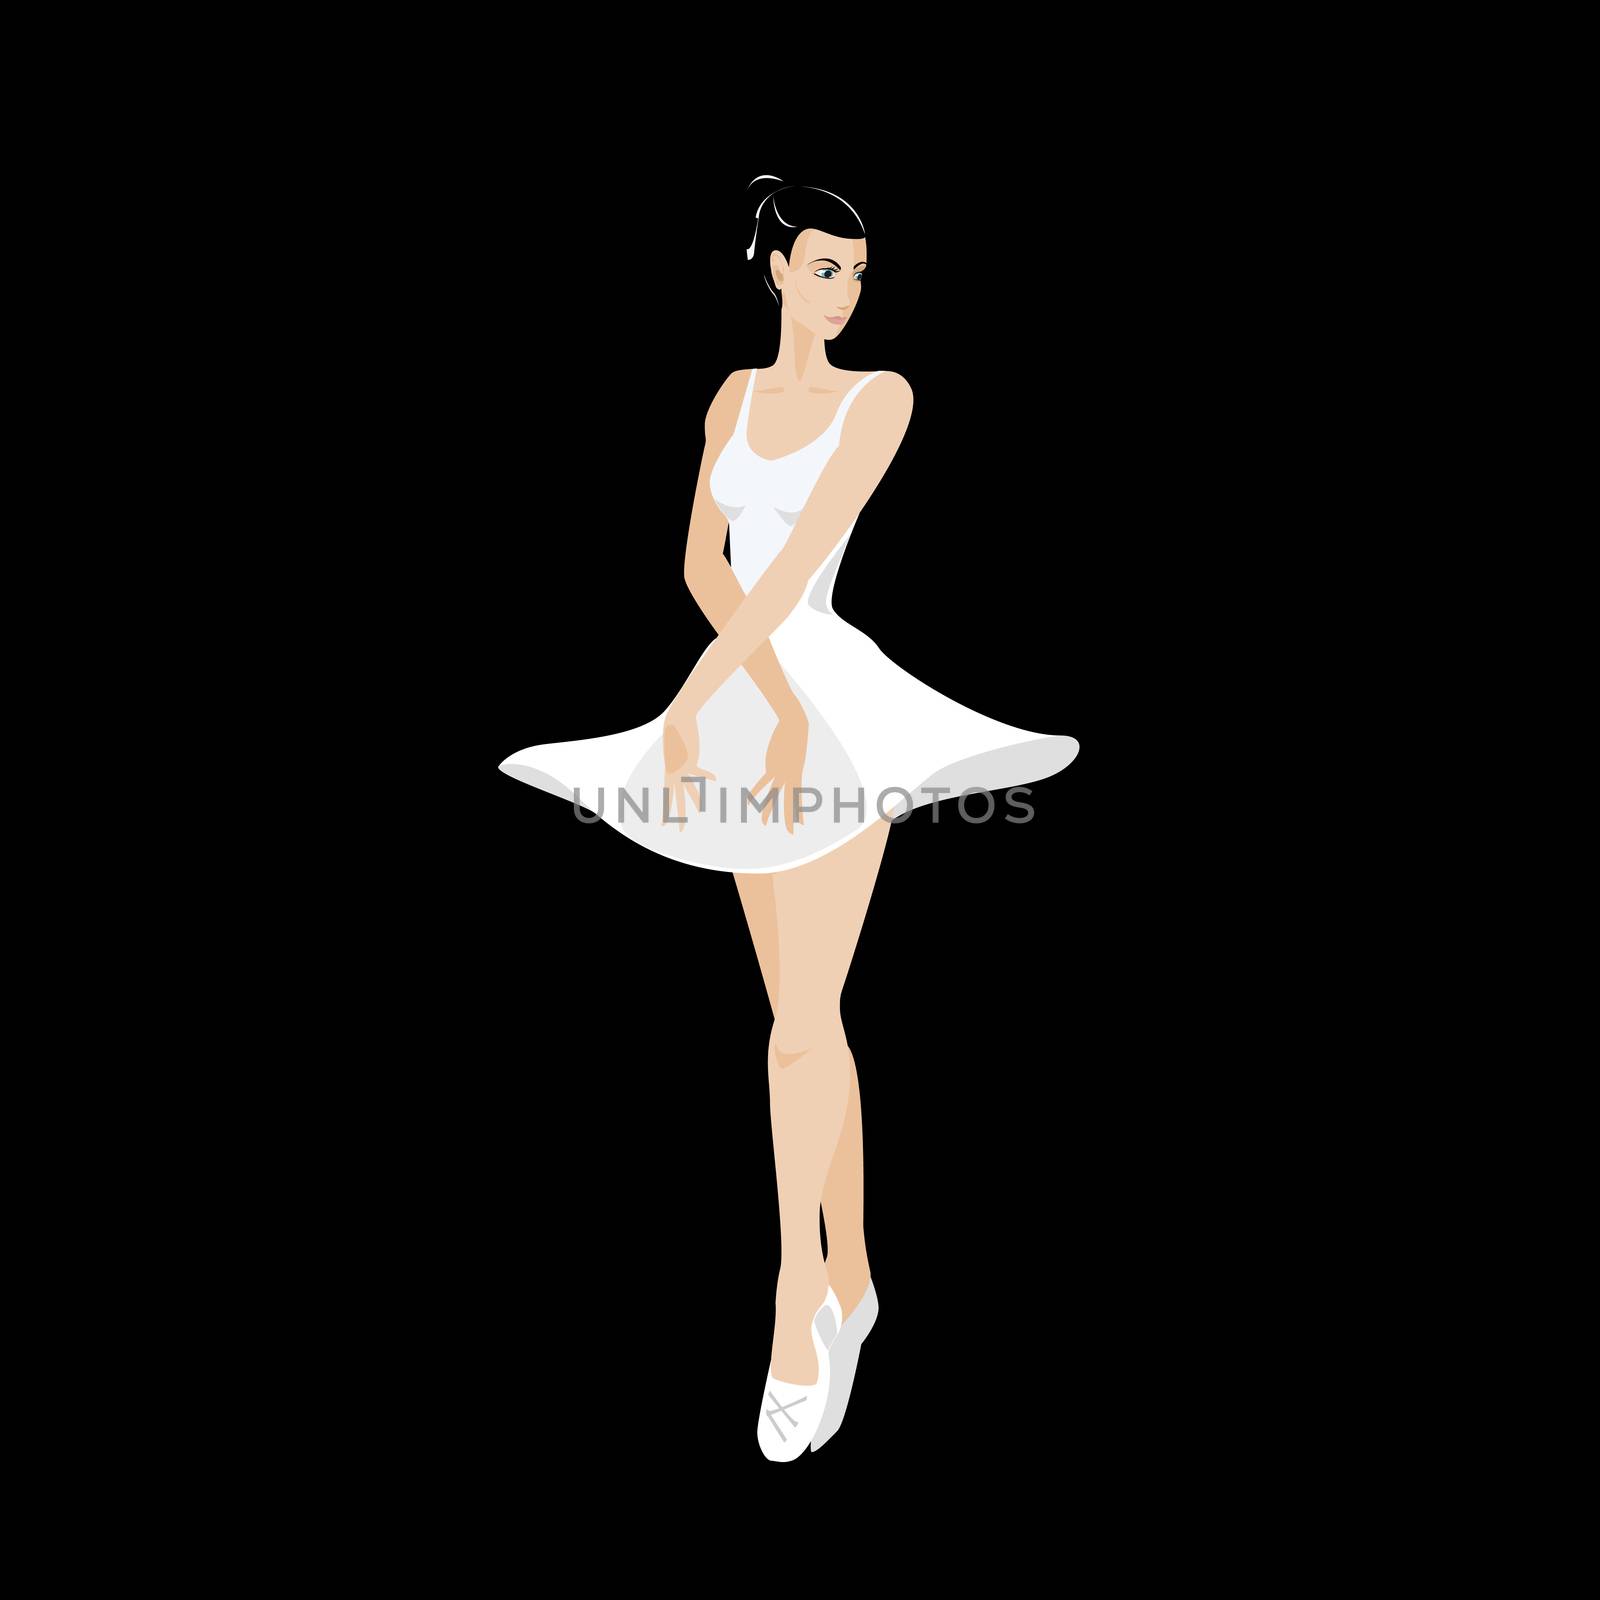 Ballerina in a white dress by Rogalevv